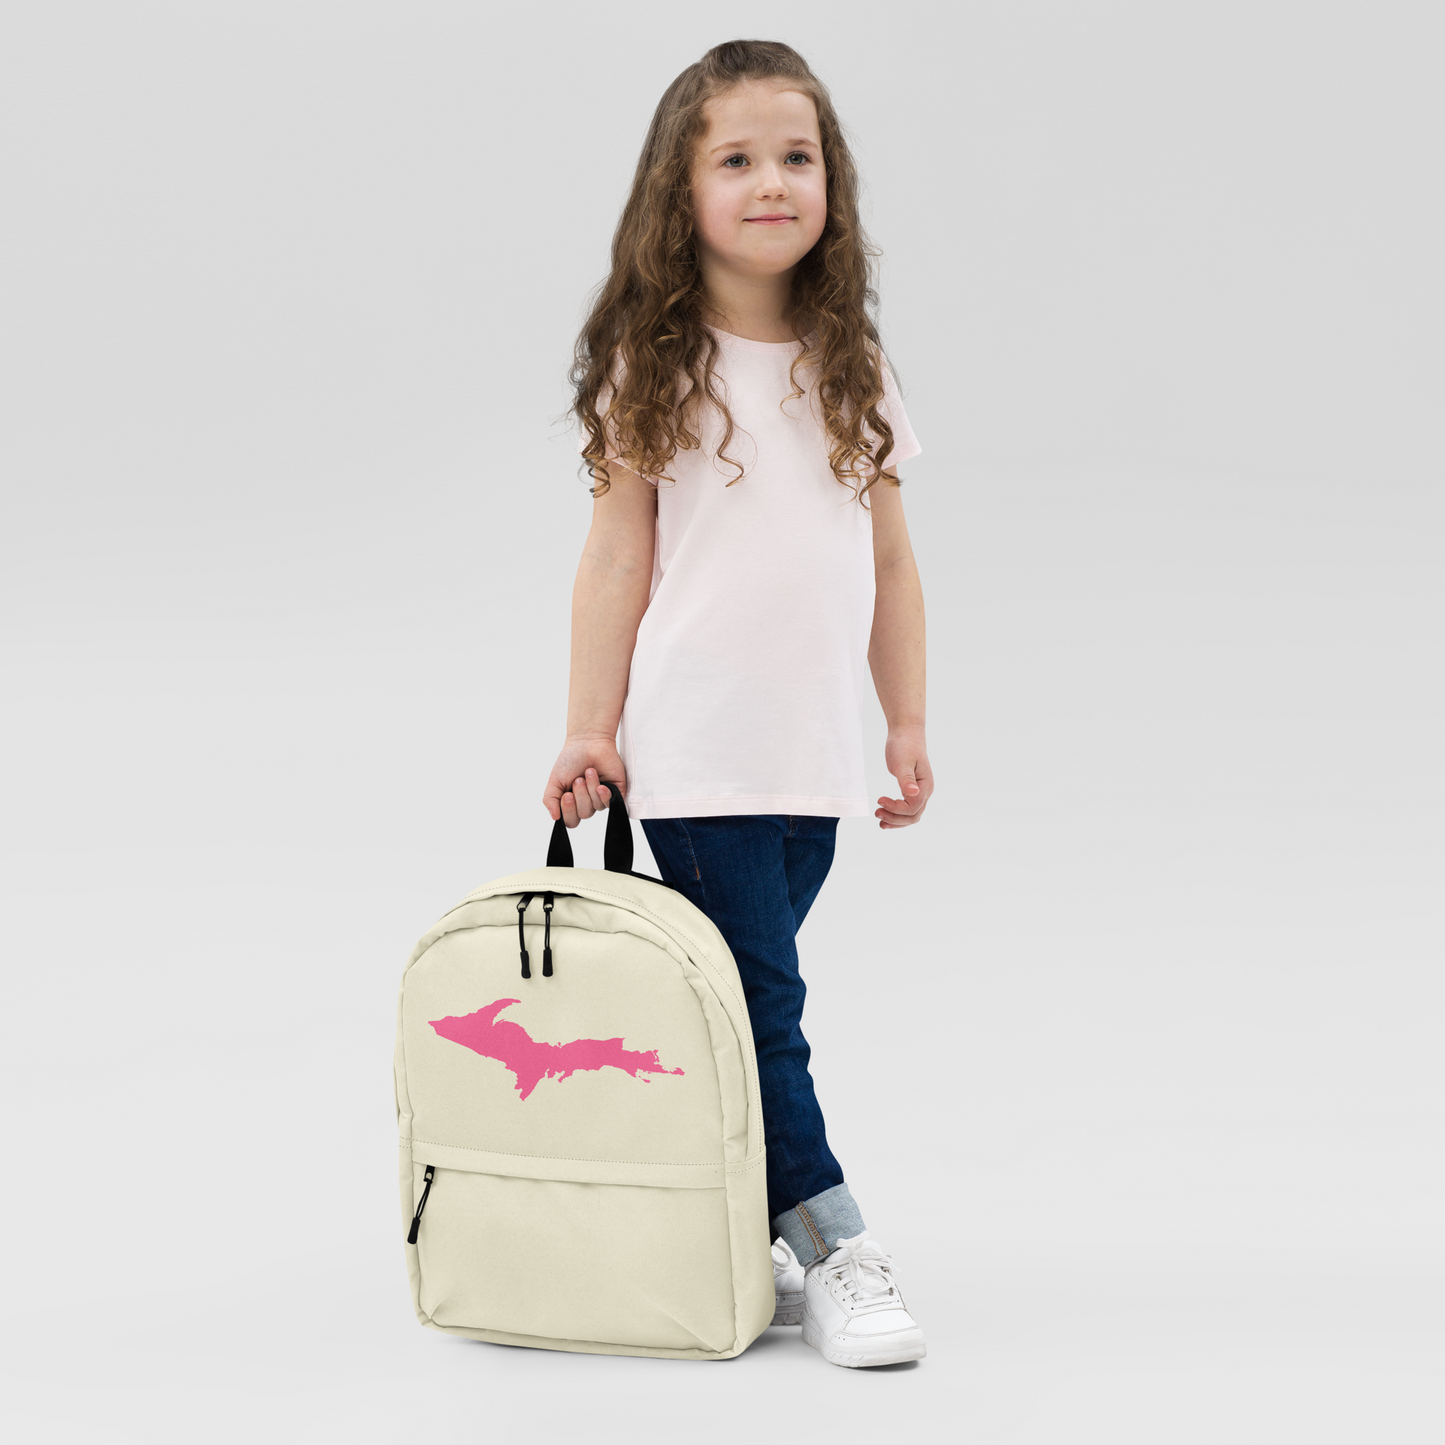 Michigan Upper Peninsula Standard Backpack (w/ Pink UP Outline) | Ivory